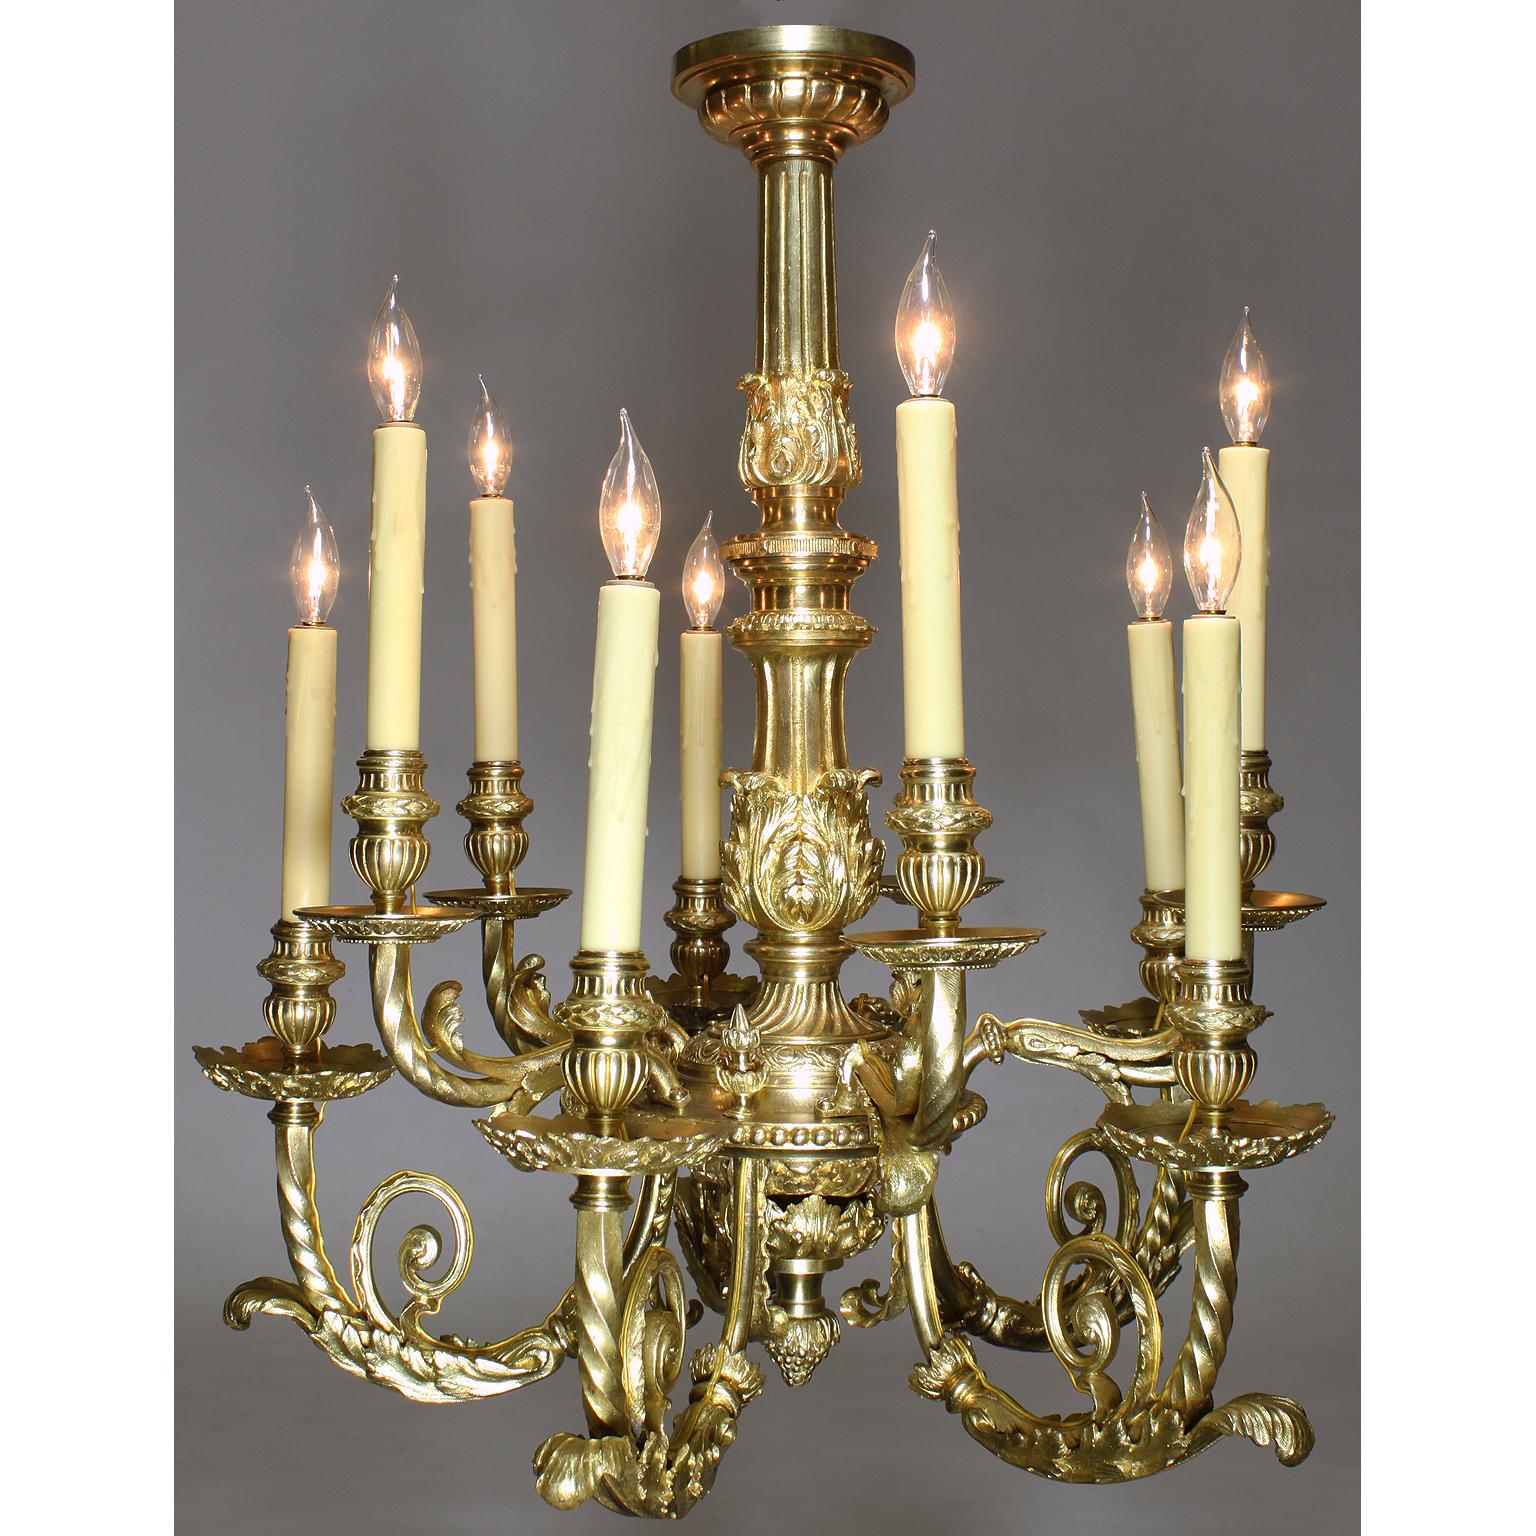 A fine French 19th-20th century Louis XV style gilt bronze ten-light chandelier, the tapering leaf tip cast and fluted shaft over an urn form bowl issuing scrolling foliate arms uplifting urn form nozzles terminating in a leaf cast pendant, Paris,